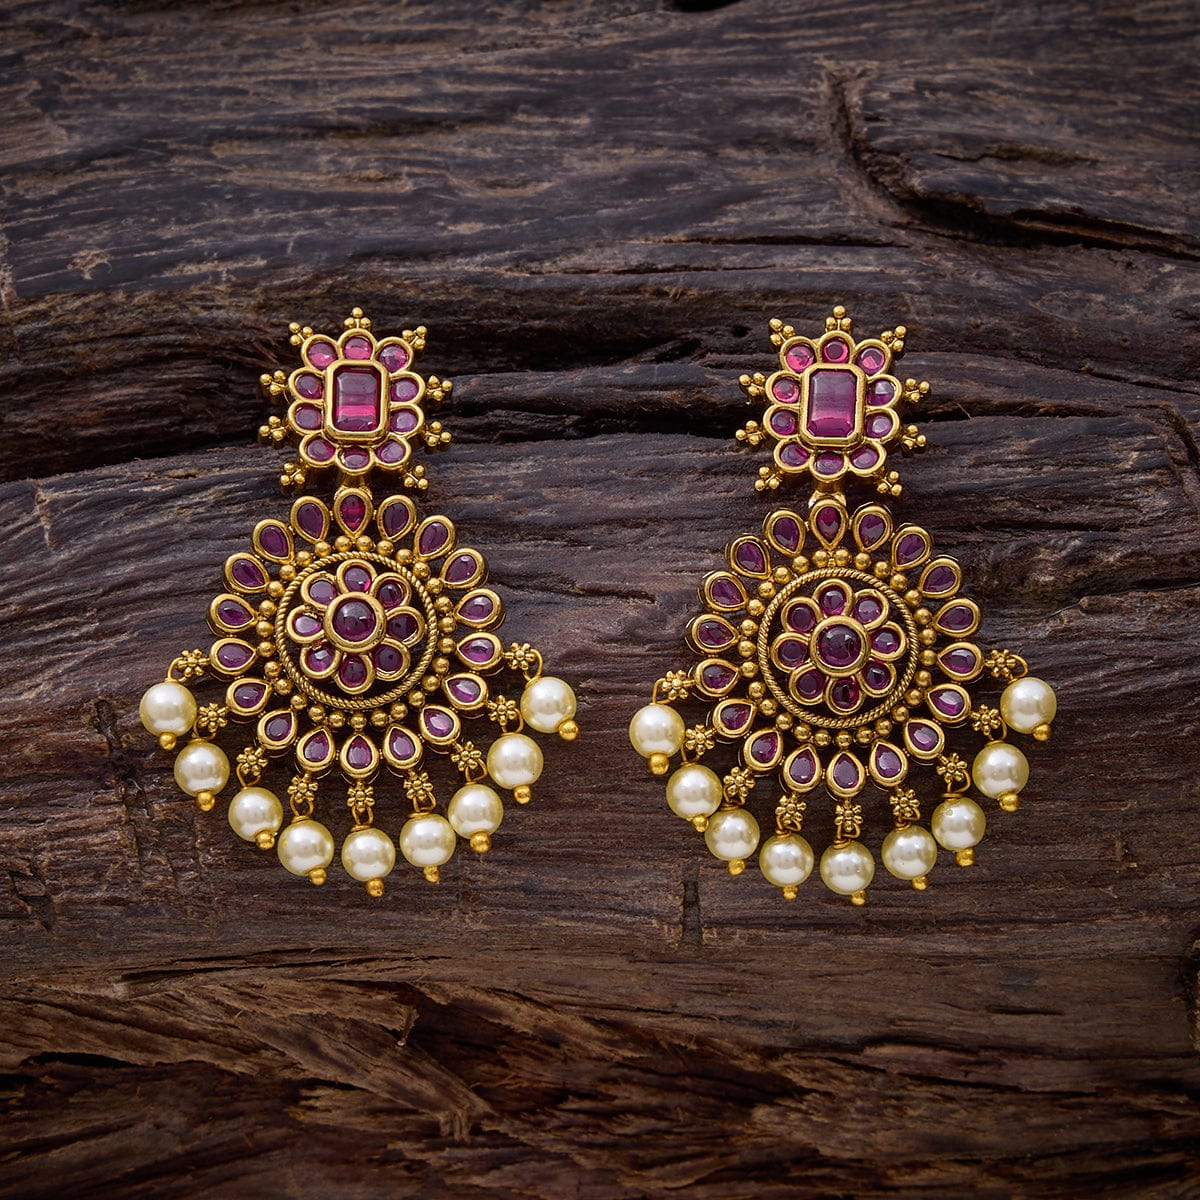 Buy Kushal's Fashion Jewellery Ruby Antique Earring Emballished with stones  at Amazon.in